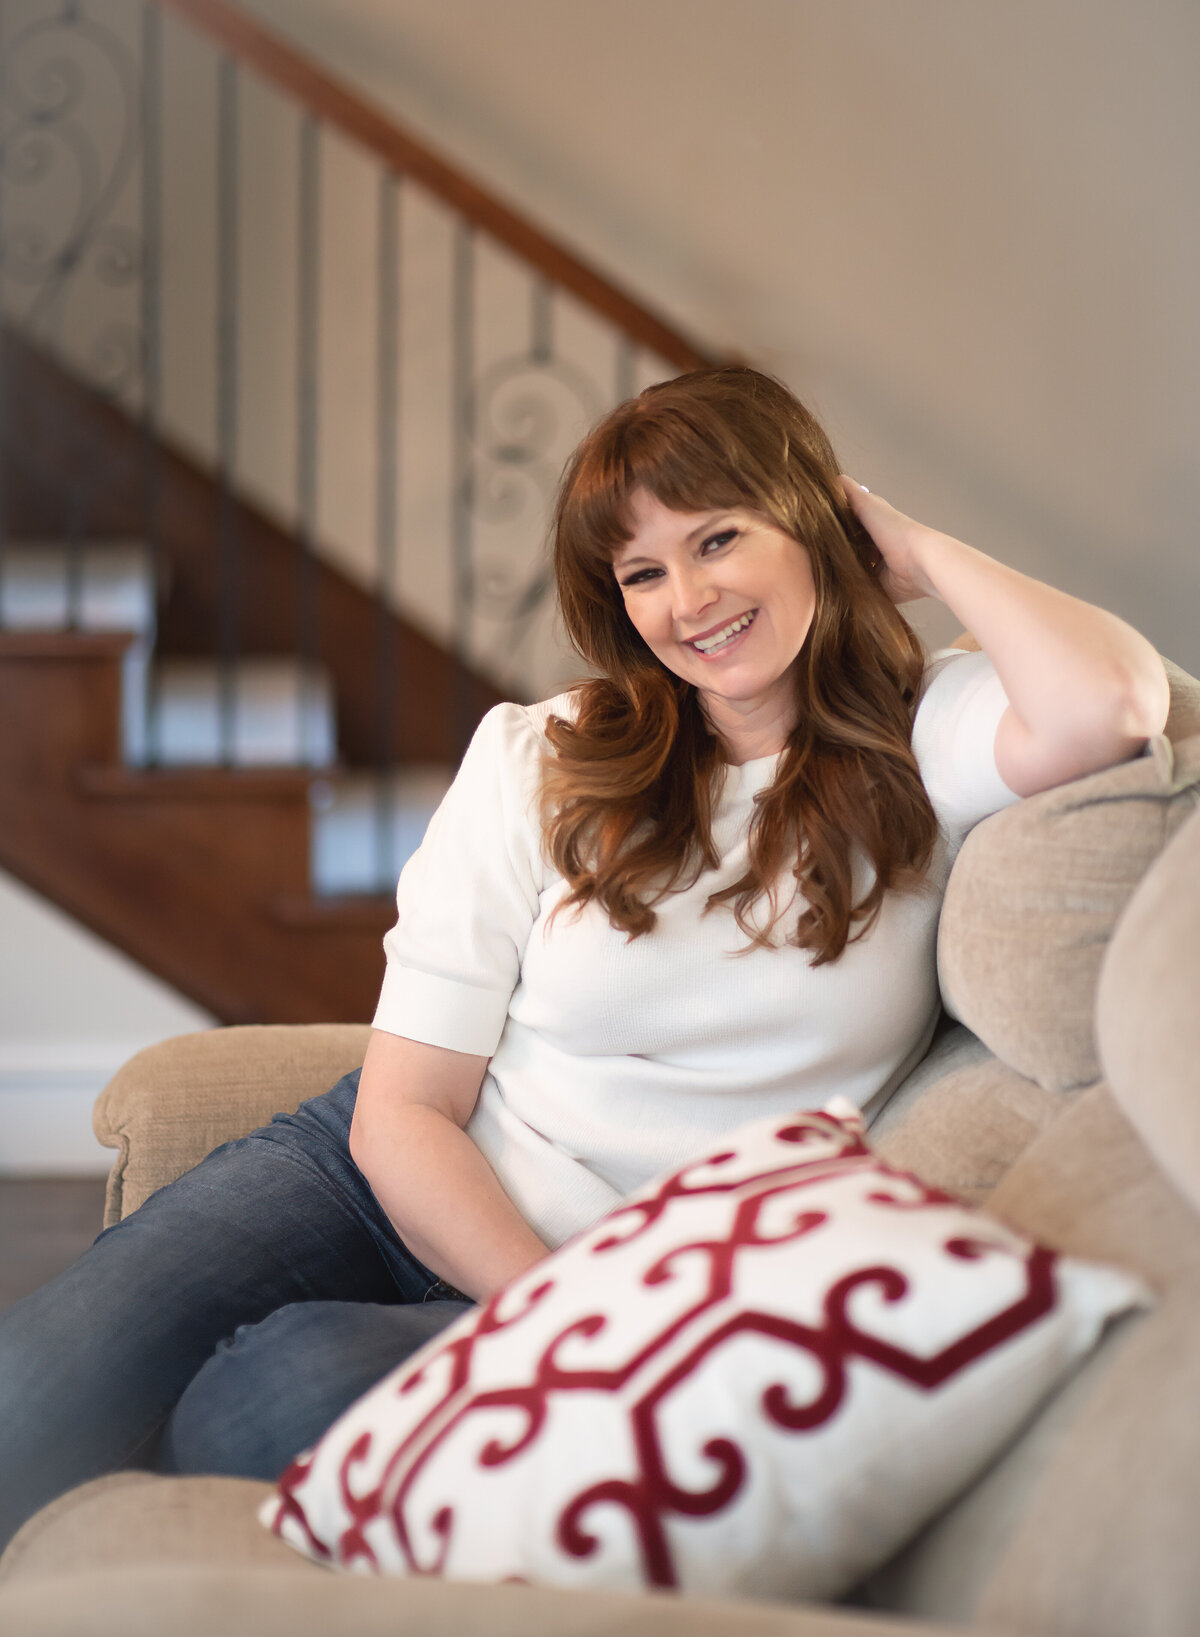 personal branding headshot of woman on her couch looking friendly and approachable